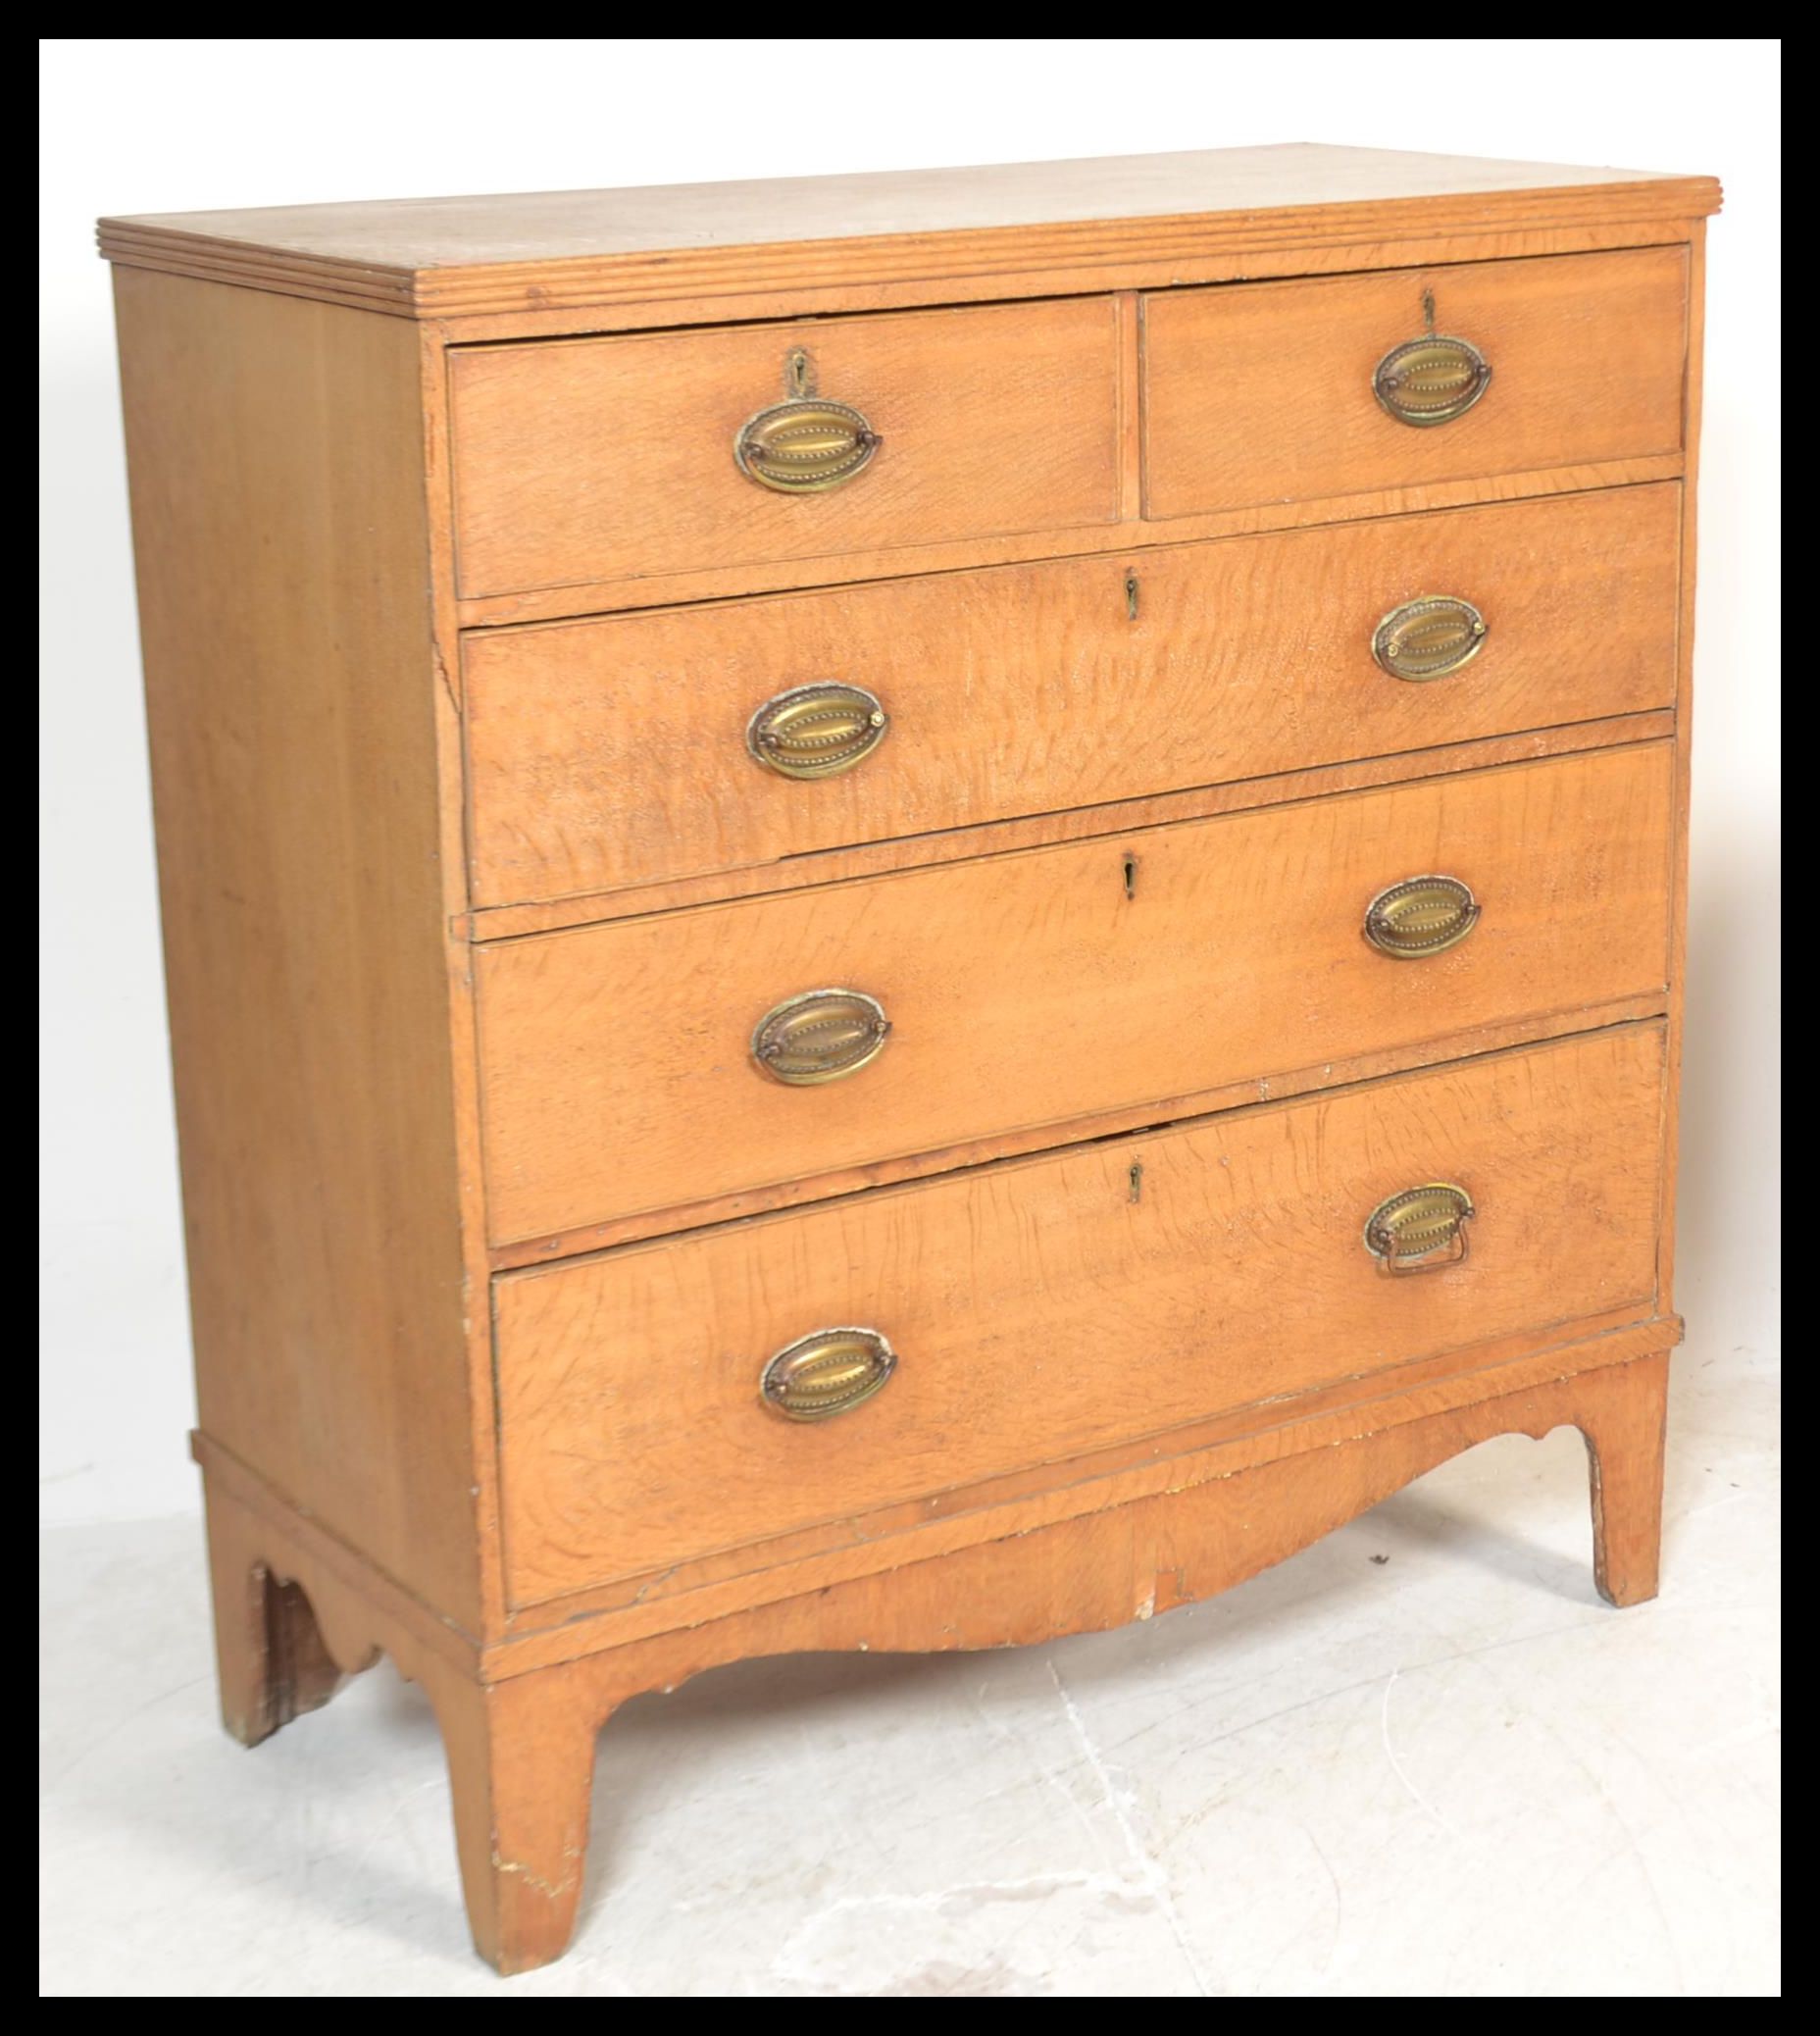 A 19th century Victorian oak chest of drawers bein - Image 2 of 5